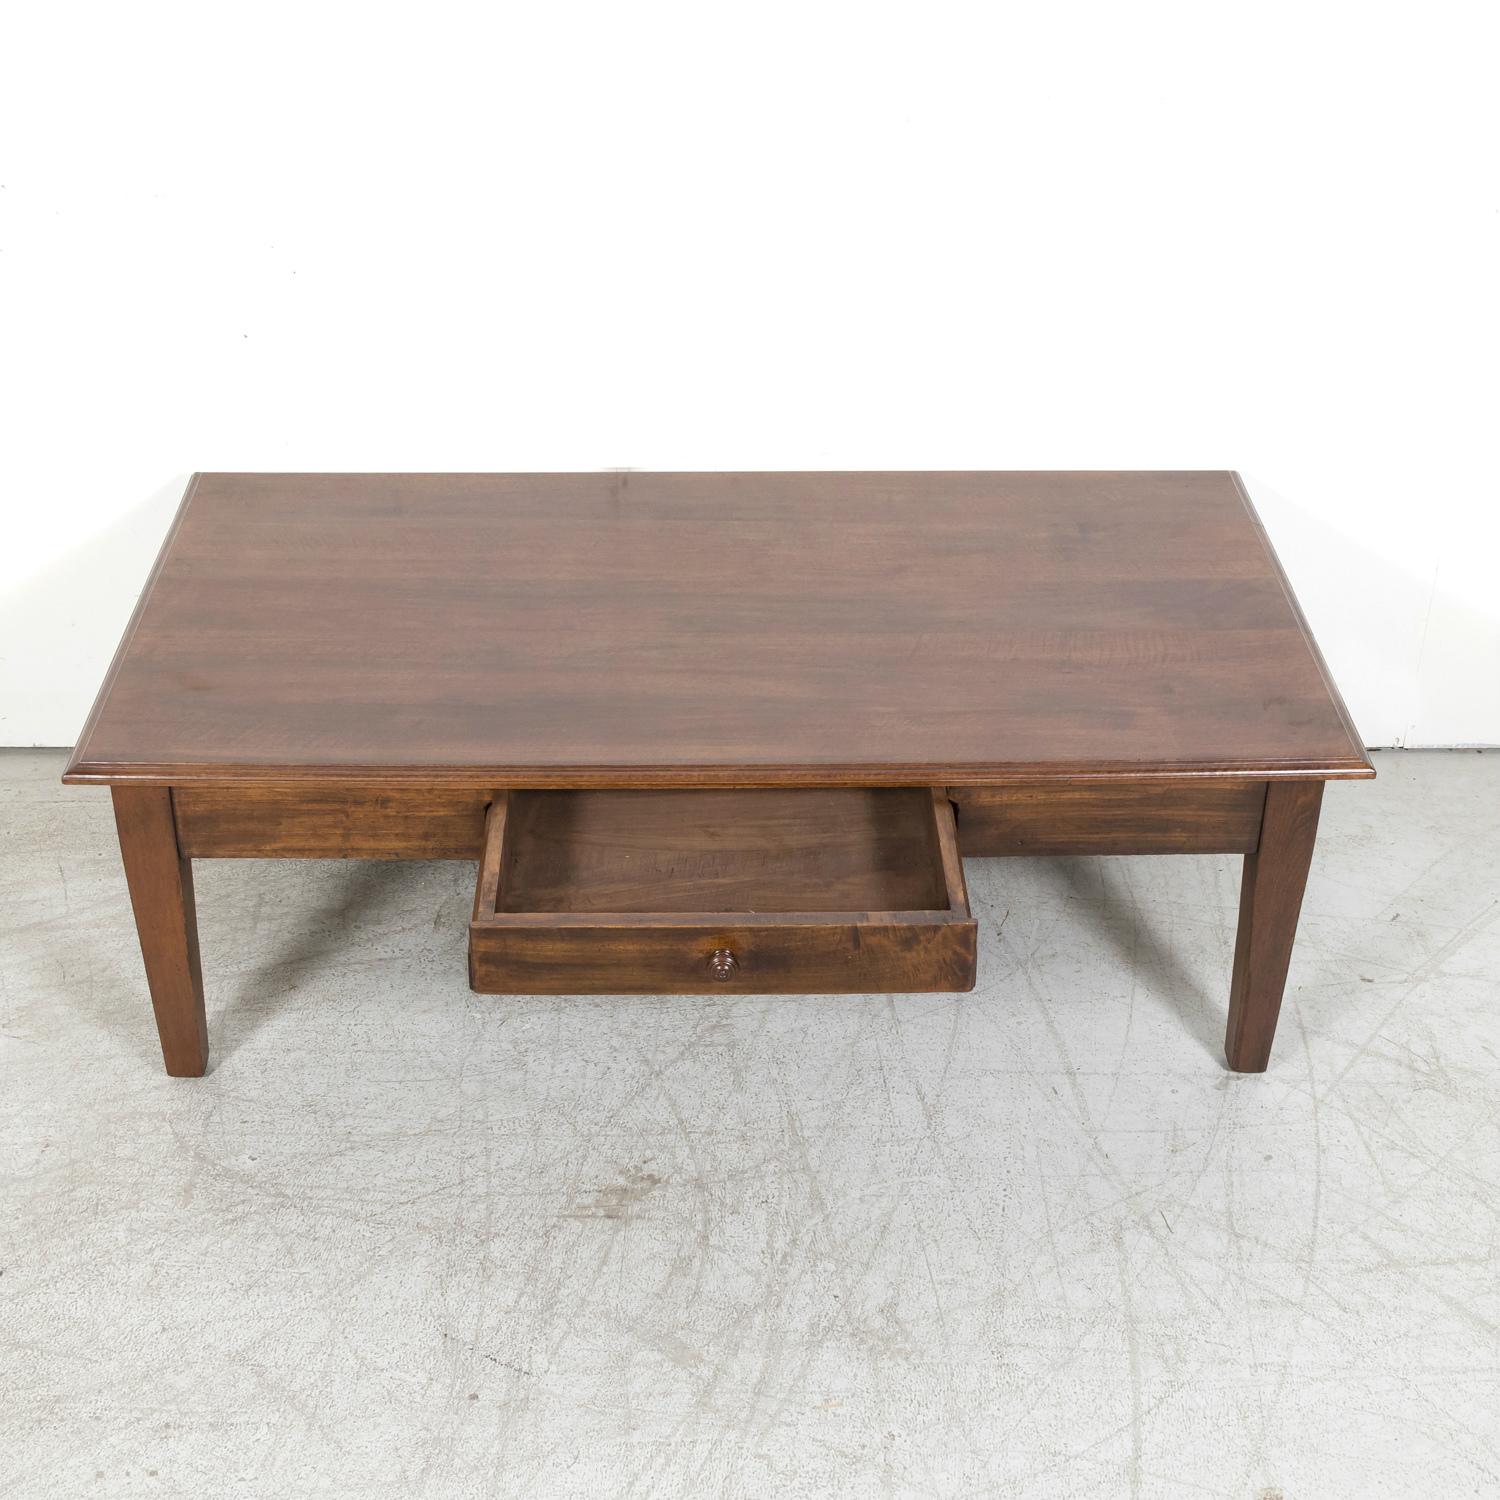 Large 19th Century Rustic French Country Solid Walnut Coffee Table with Drawer For Sale 3